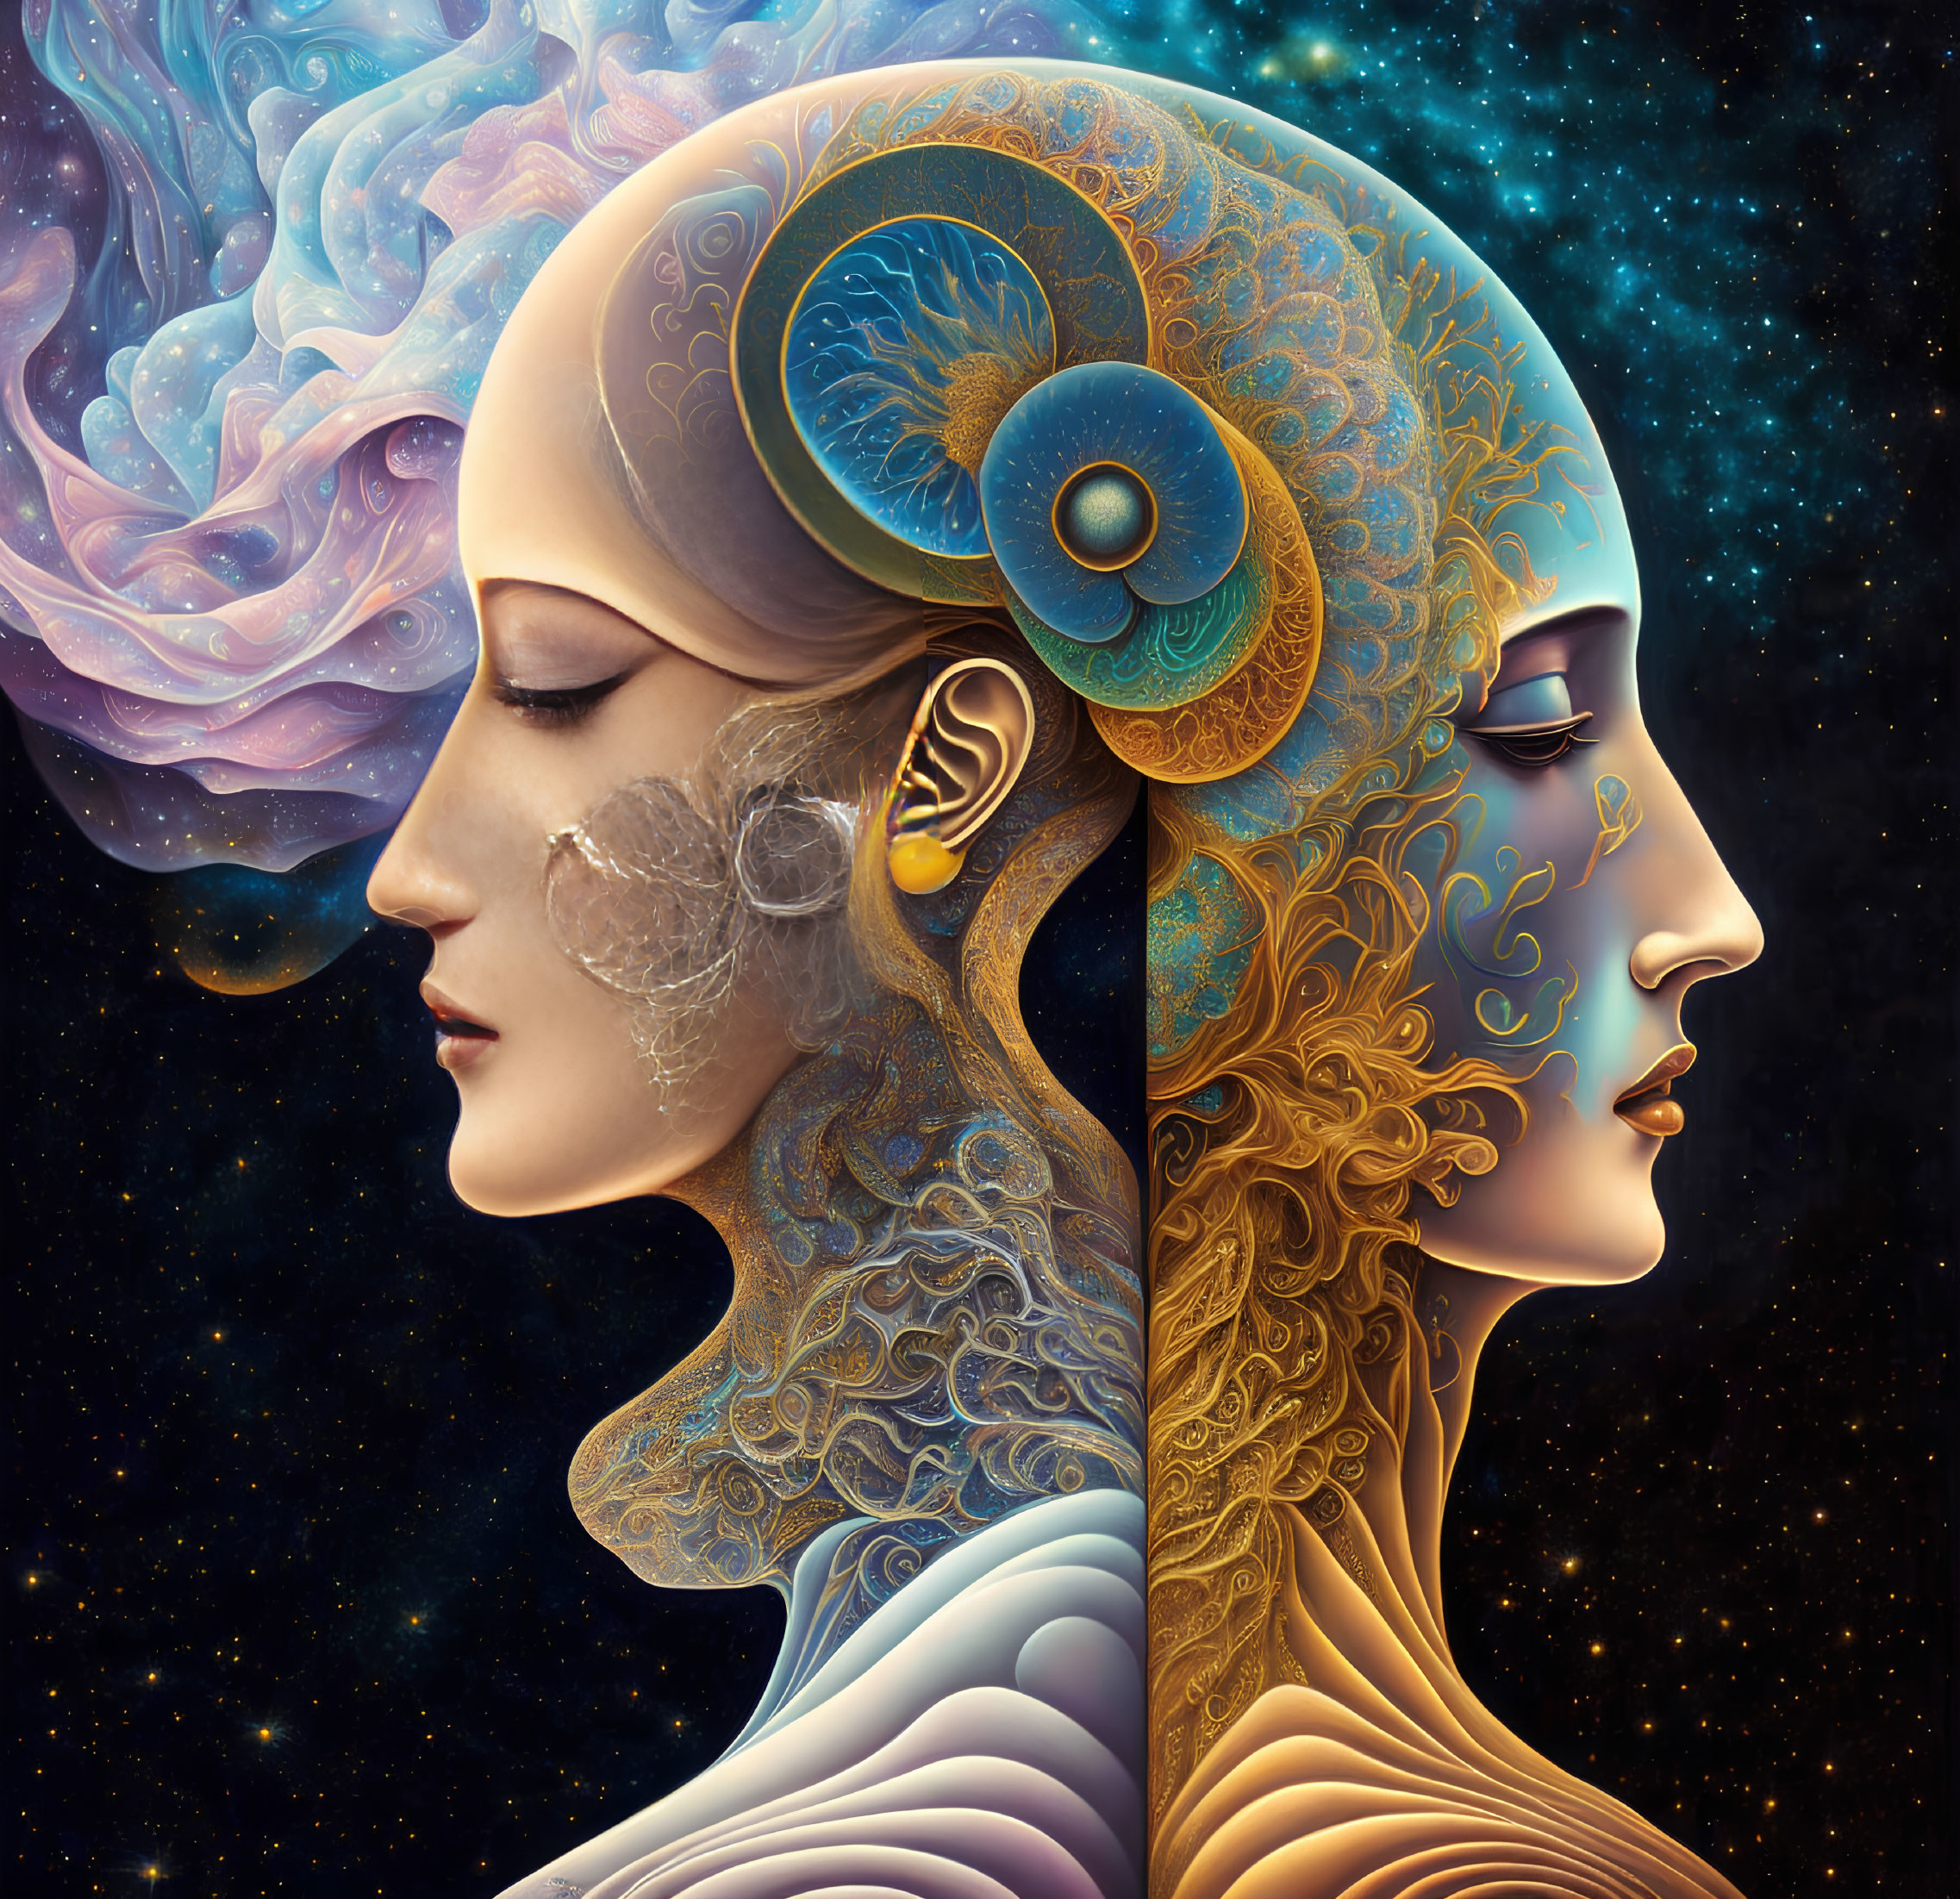 Surreal digital artwork featuring cosmic and golden patterned faces